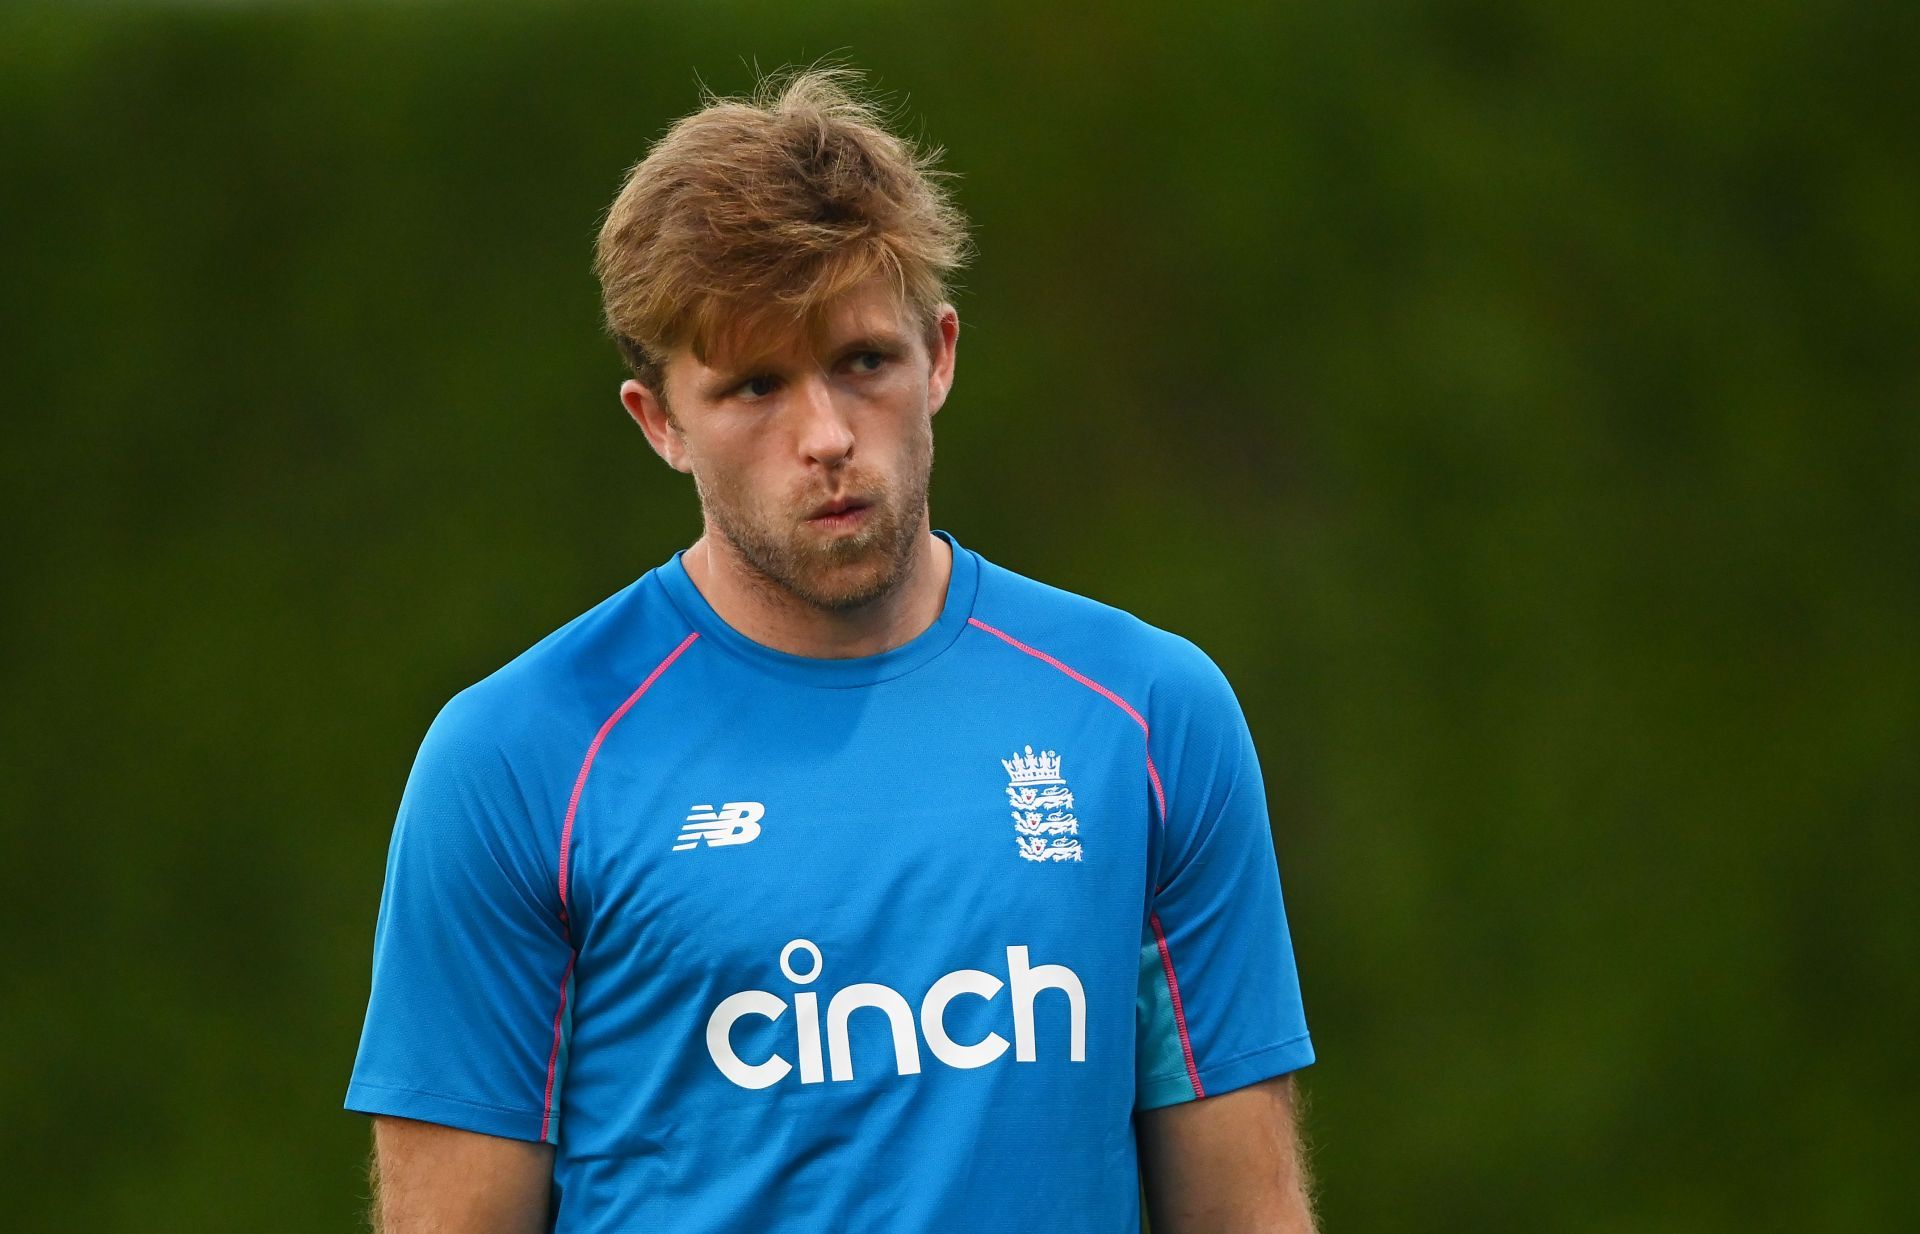 David Willey has a lot of experience